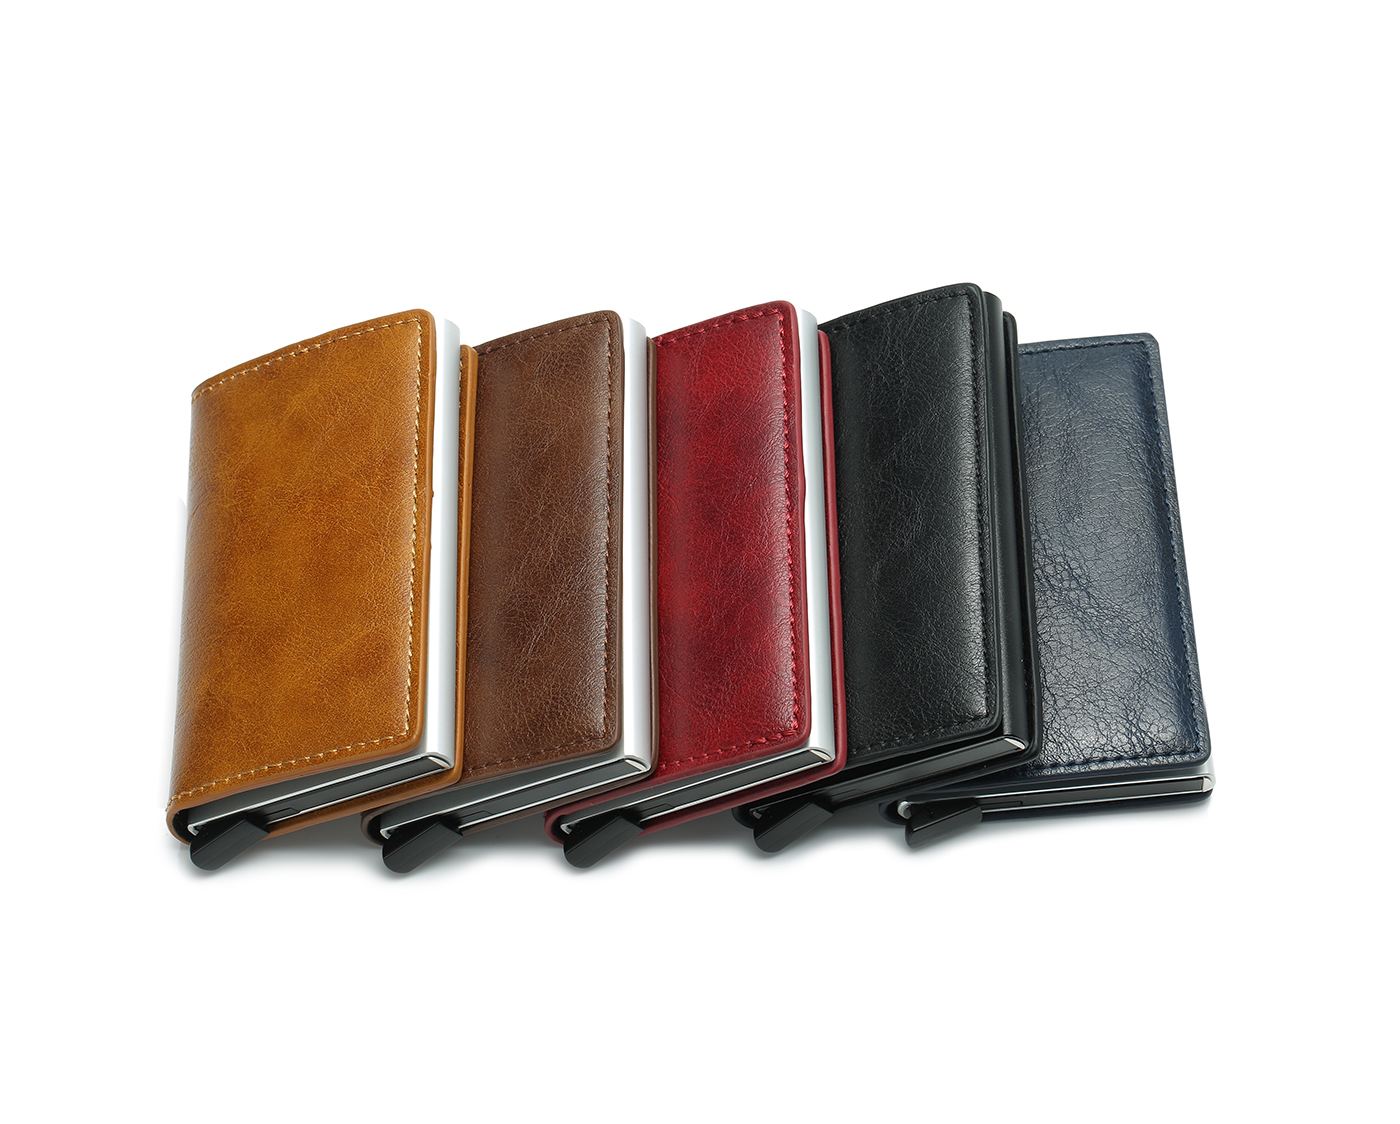 2020 new design rfid block man business card holder leather bifold bank card wallet promotional best gift for husband father